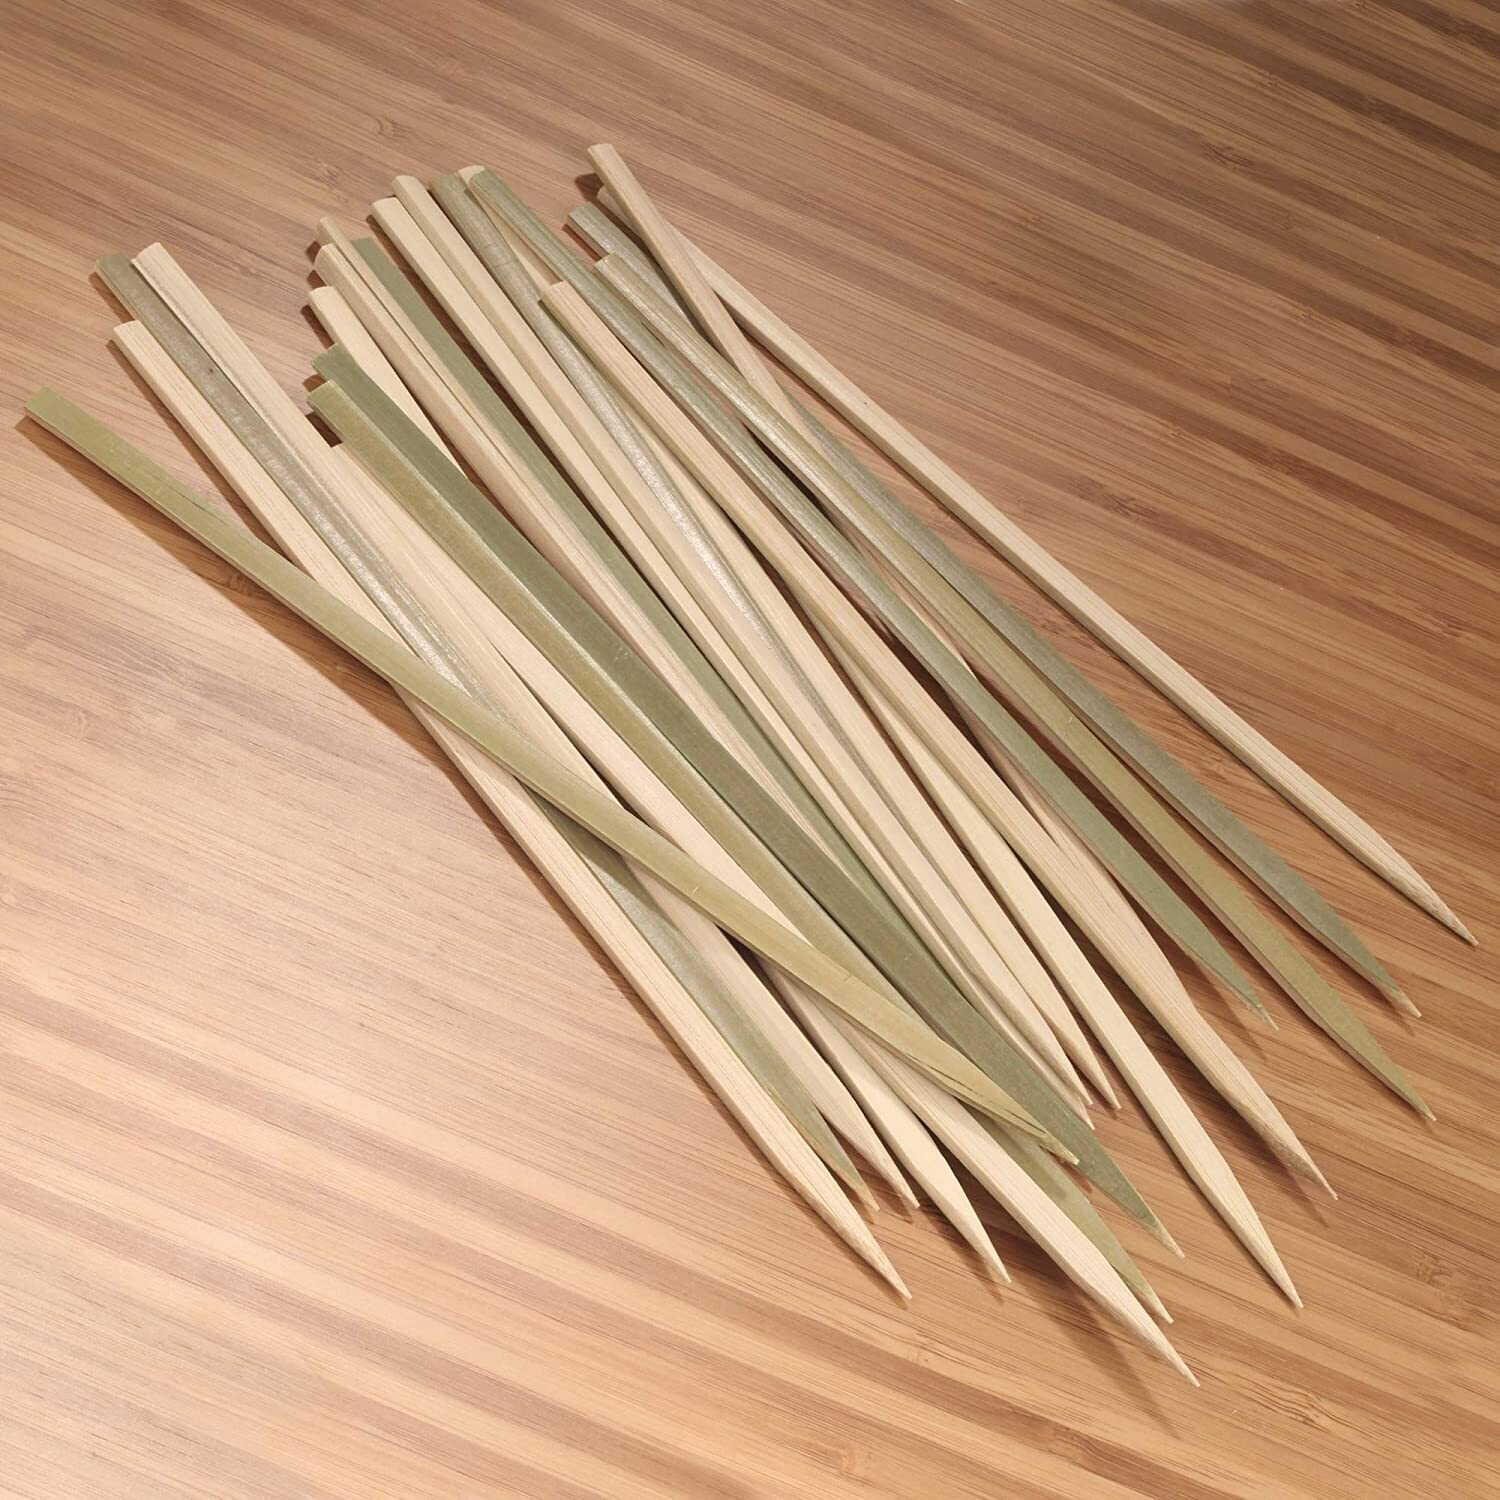 Super Touch Barbecue Bamboo Broad Flat Skewers 15"x3mm - Pack of 50pcs (STBW010A) - Disposable Cutlery for Grilling